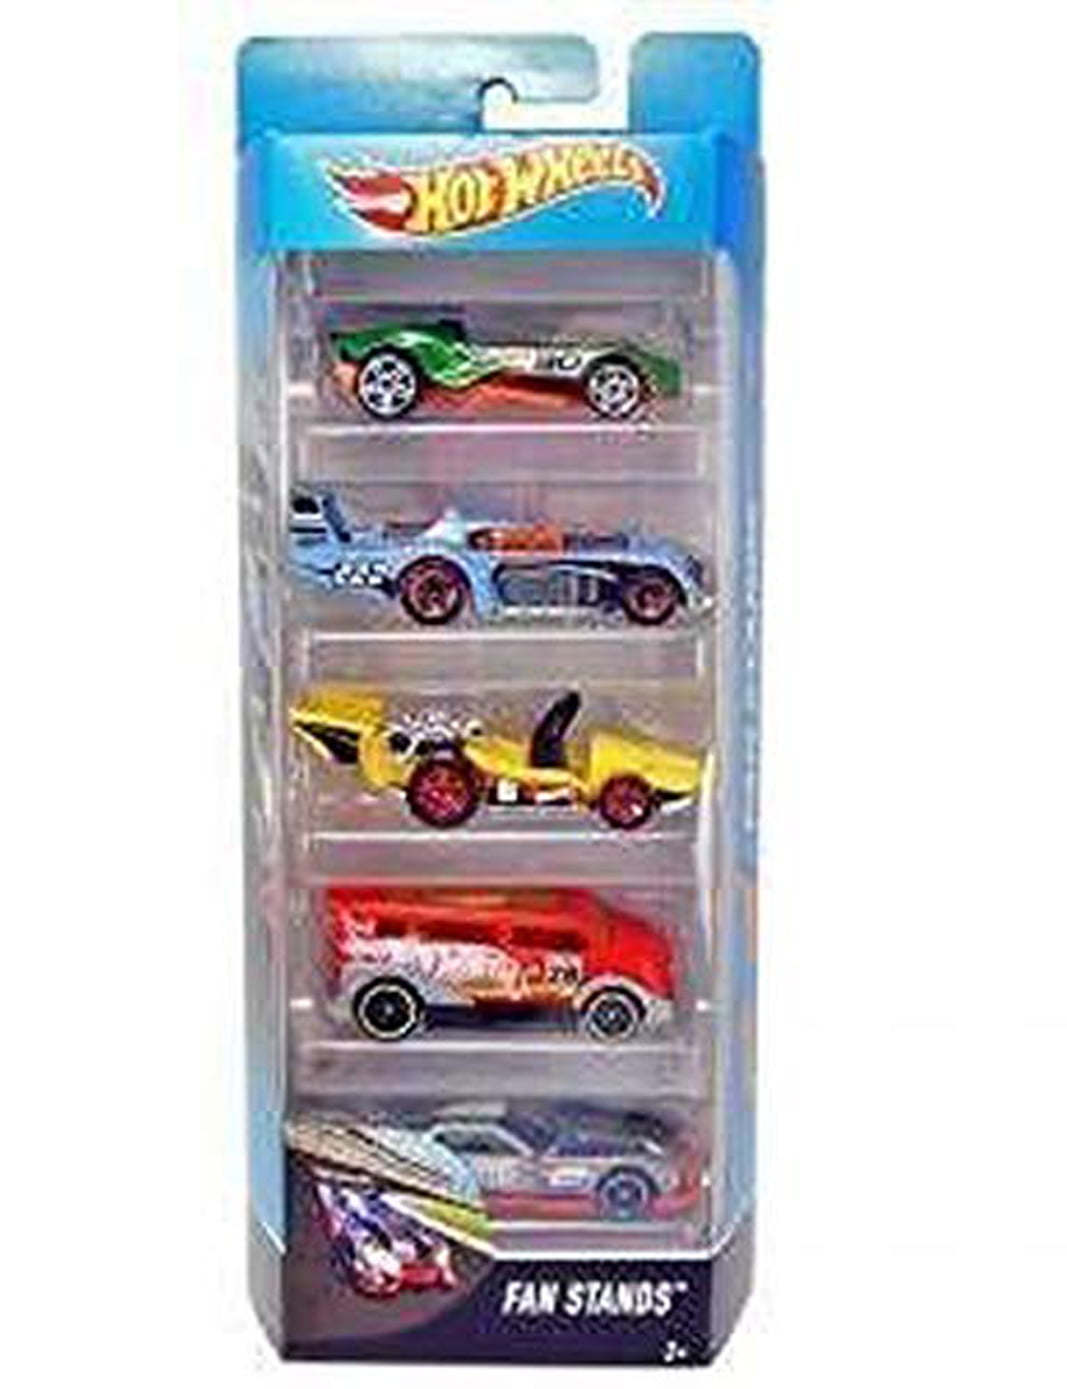 2017 FAN STANDS Desgin LET'S GO☆yellow;red 5sp; 6☆Hot Wheels LOOSE 